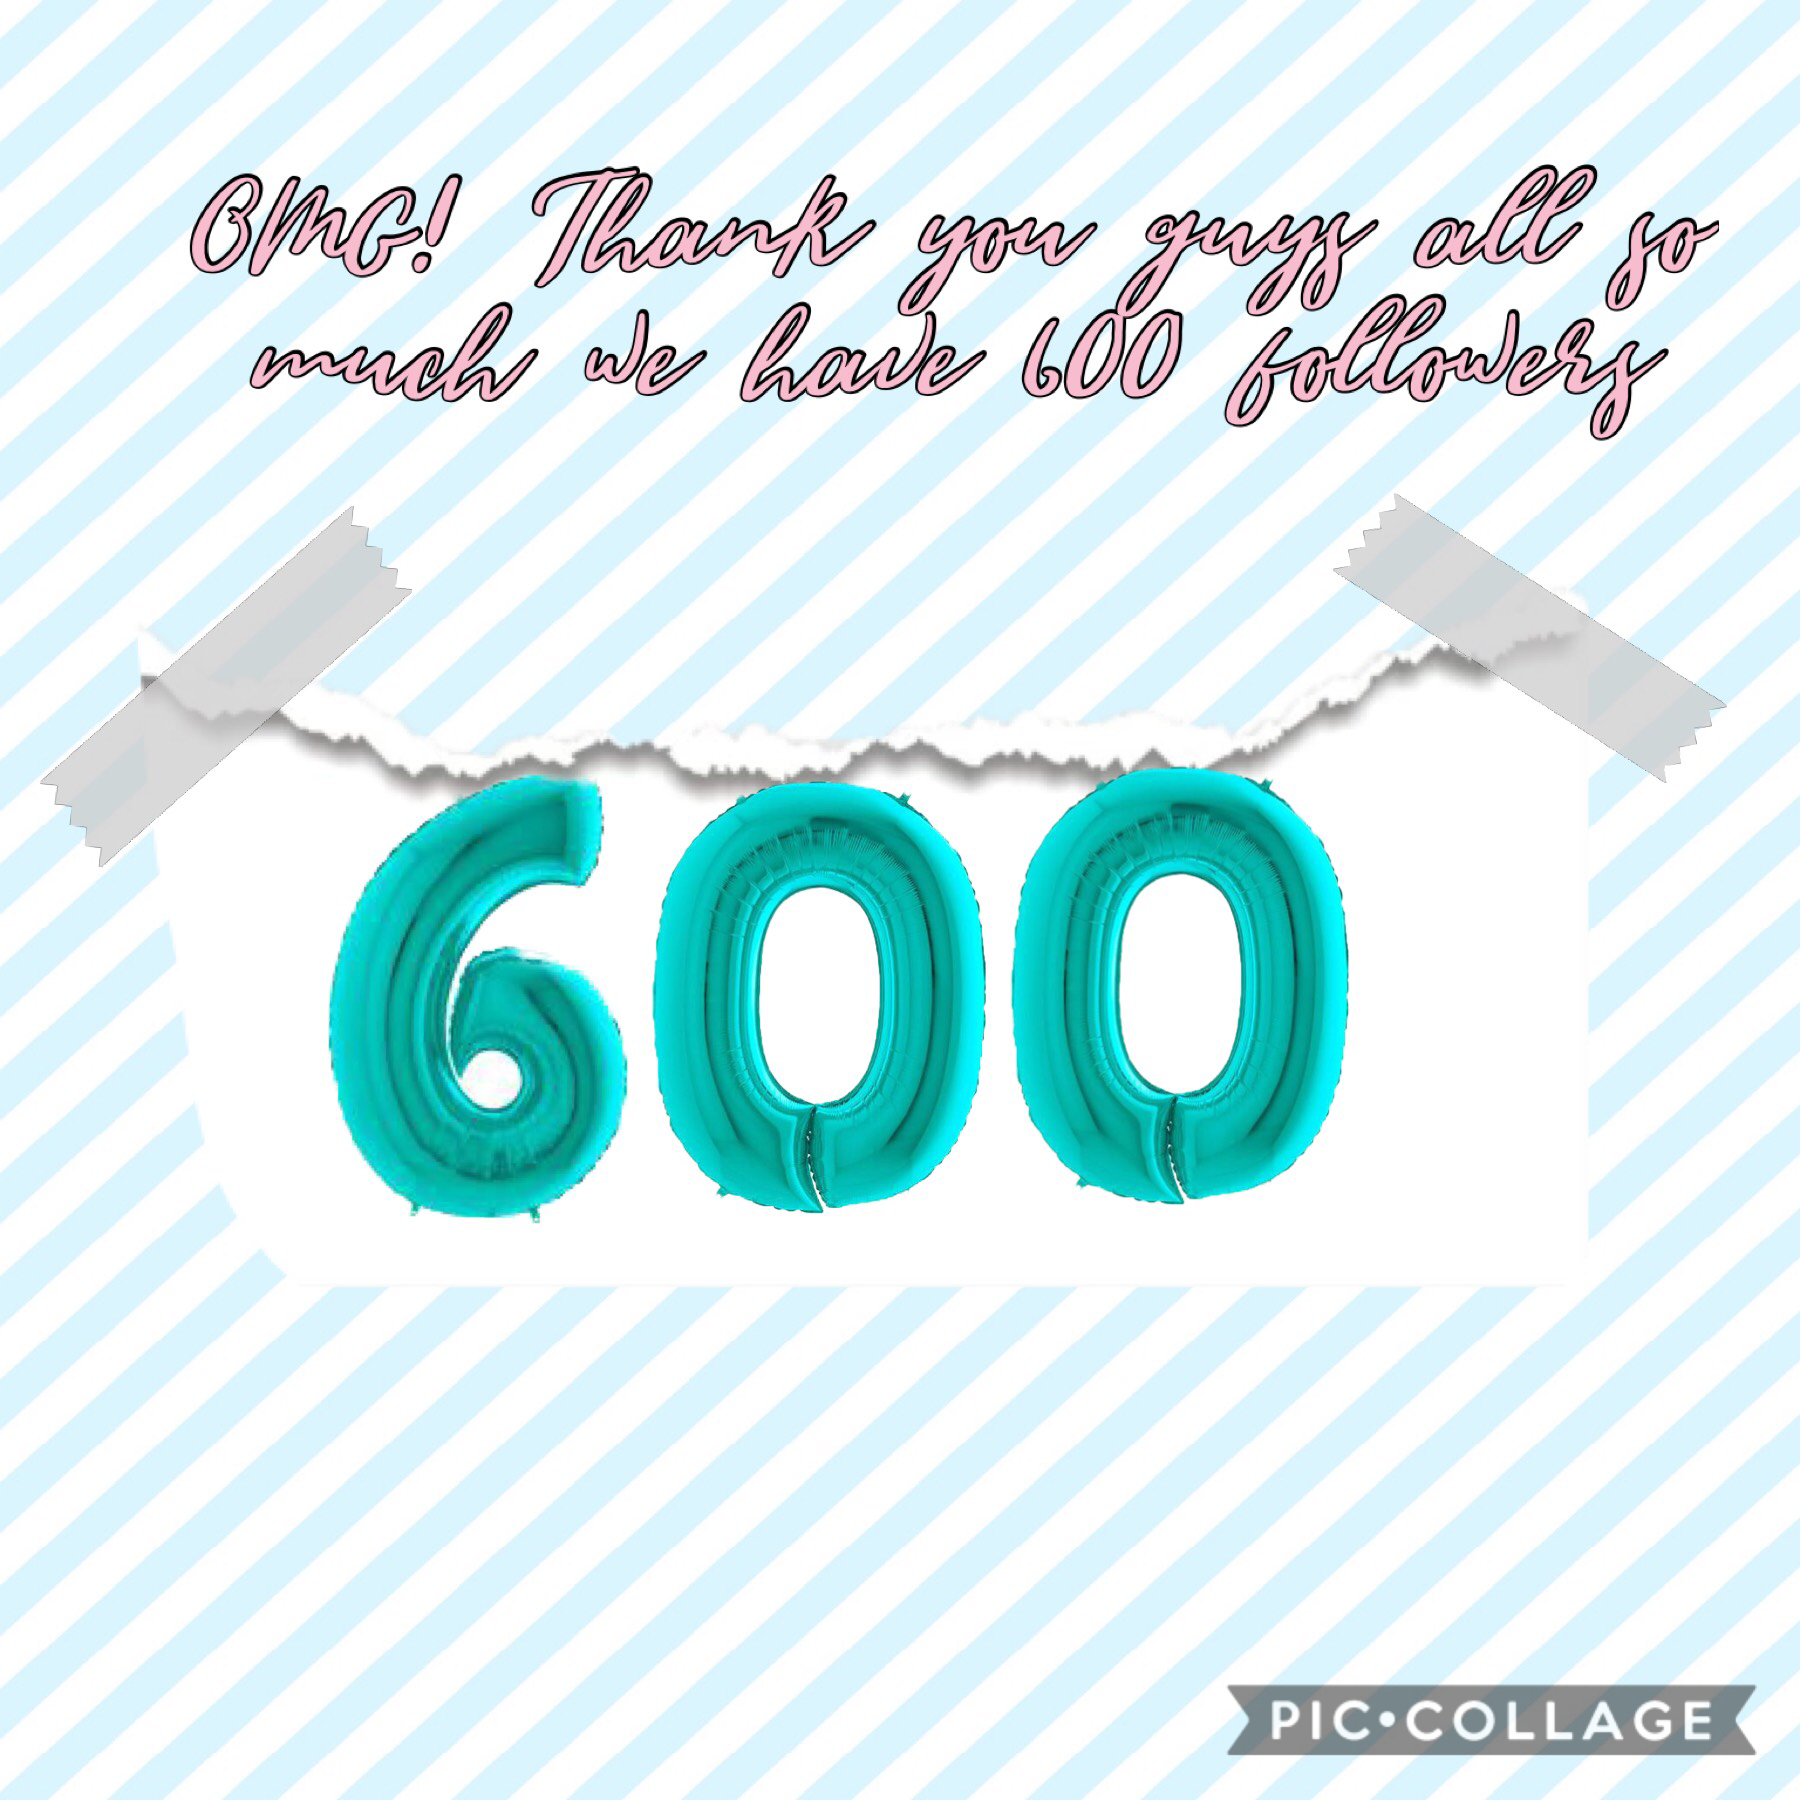 600! You guys are absolutely amazing, THANK YOU💫